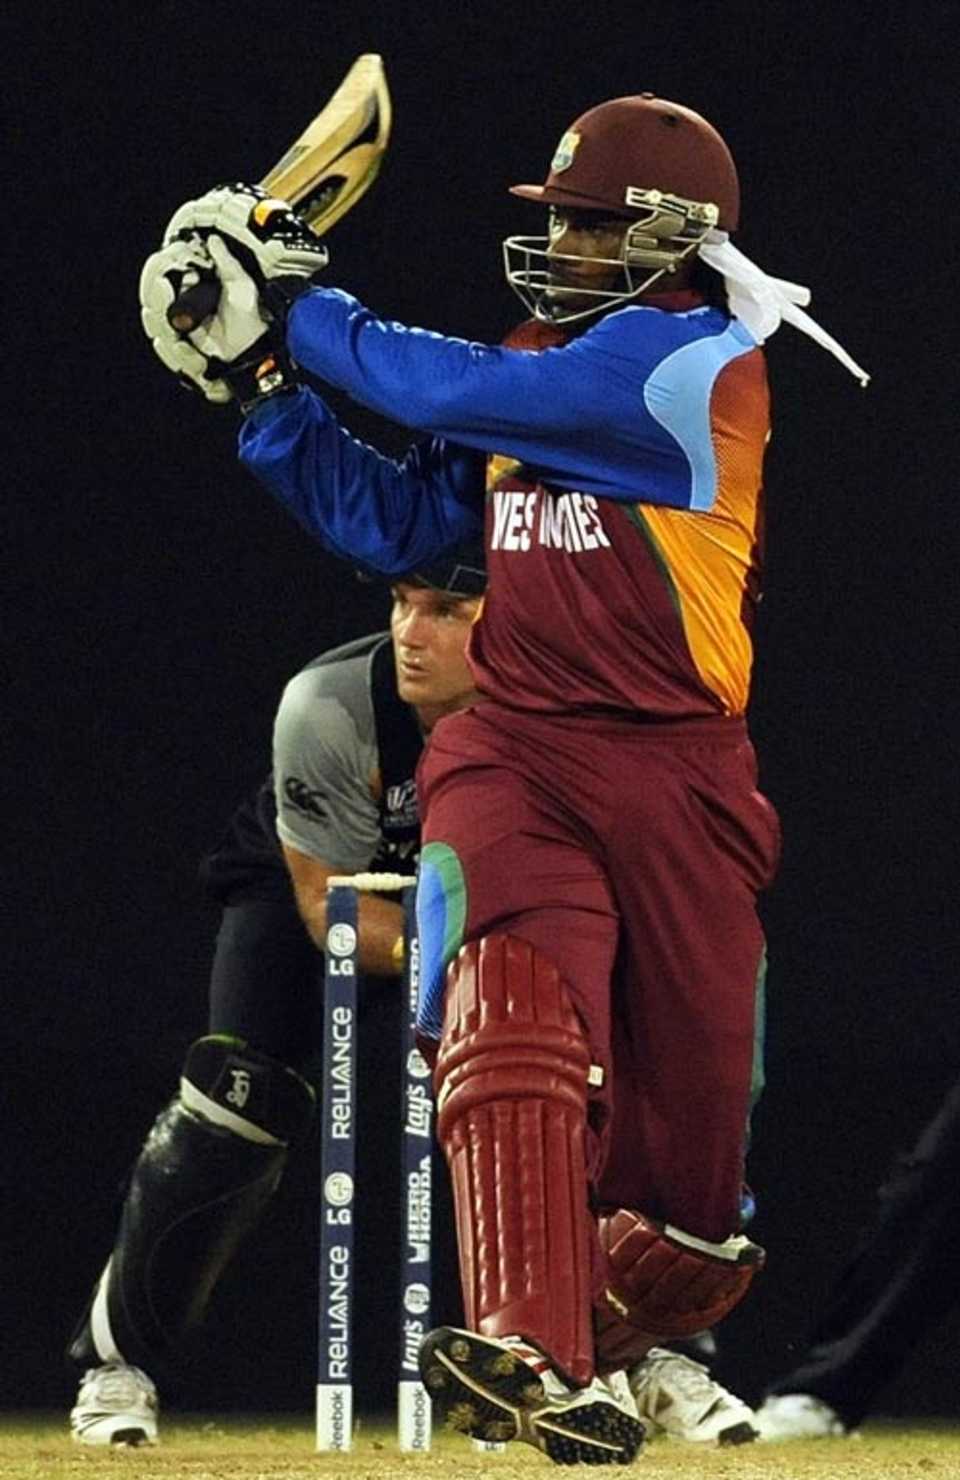 Chris Gayle goes for a pull, West Indies v New Zealand, ICC World Twenty20 warm-up, Guyana, April 28, 2010